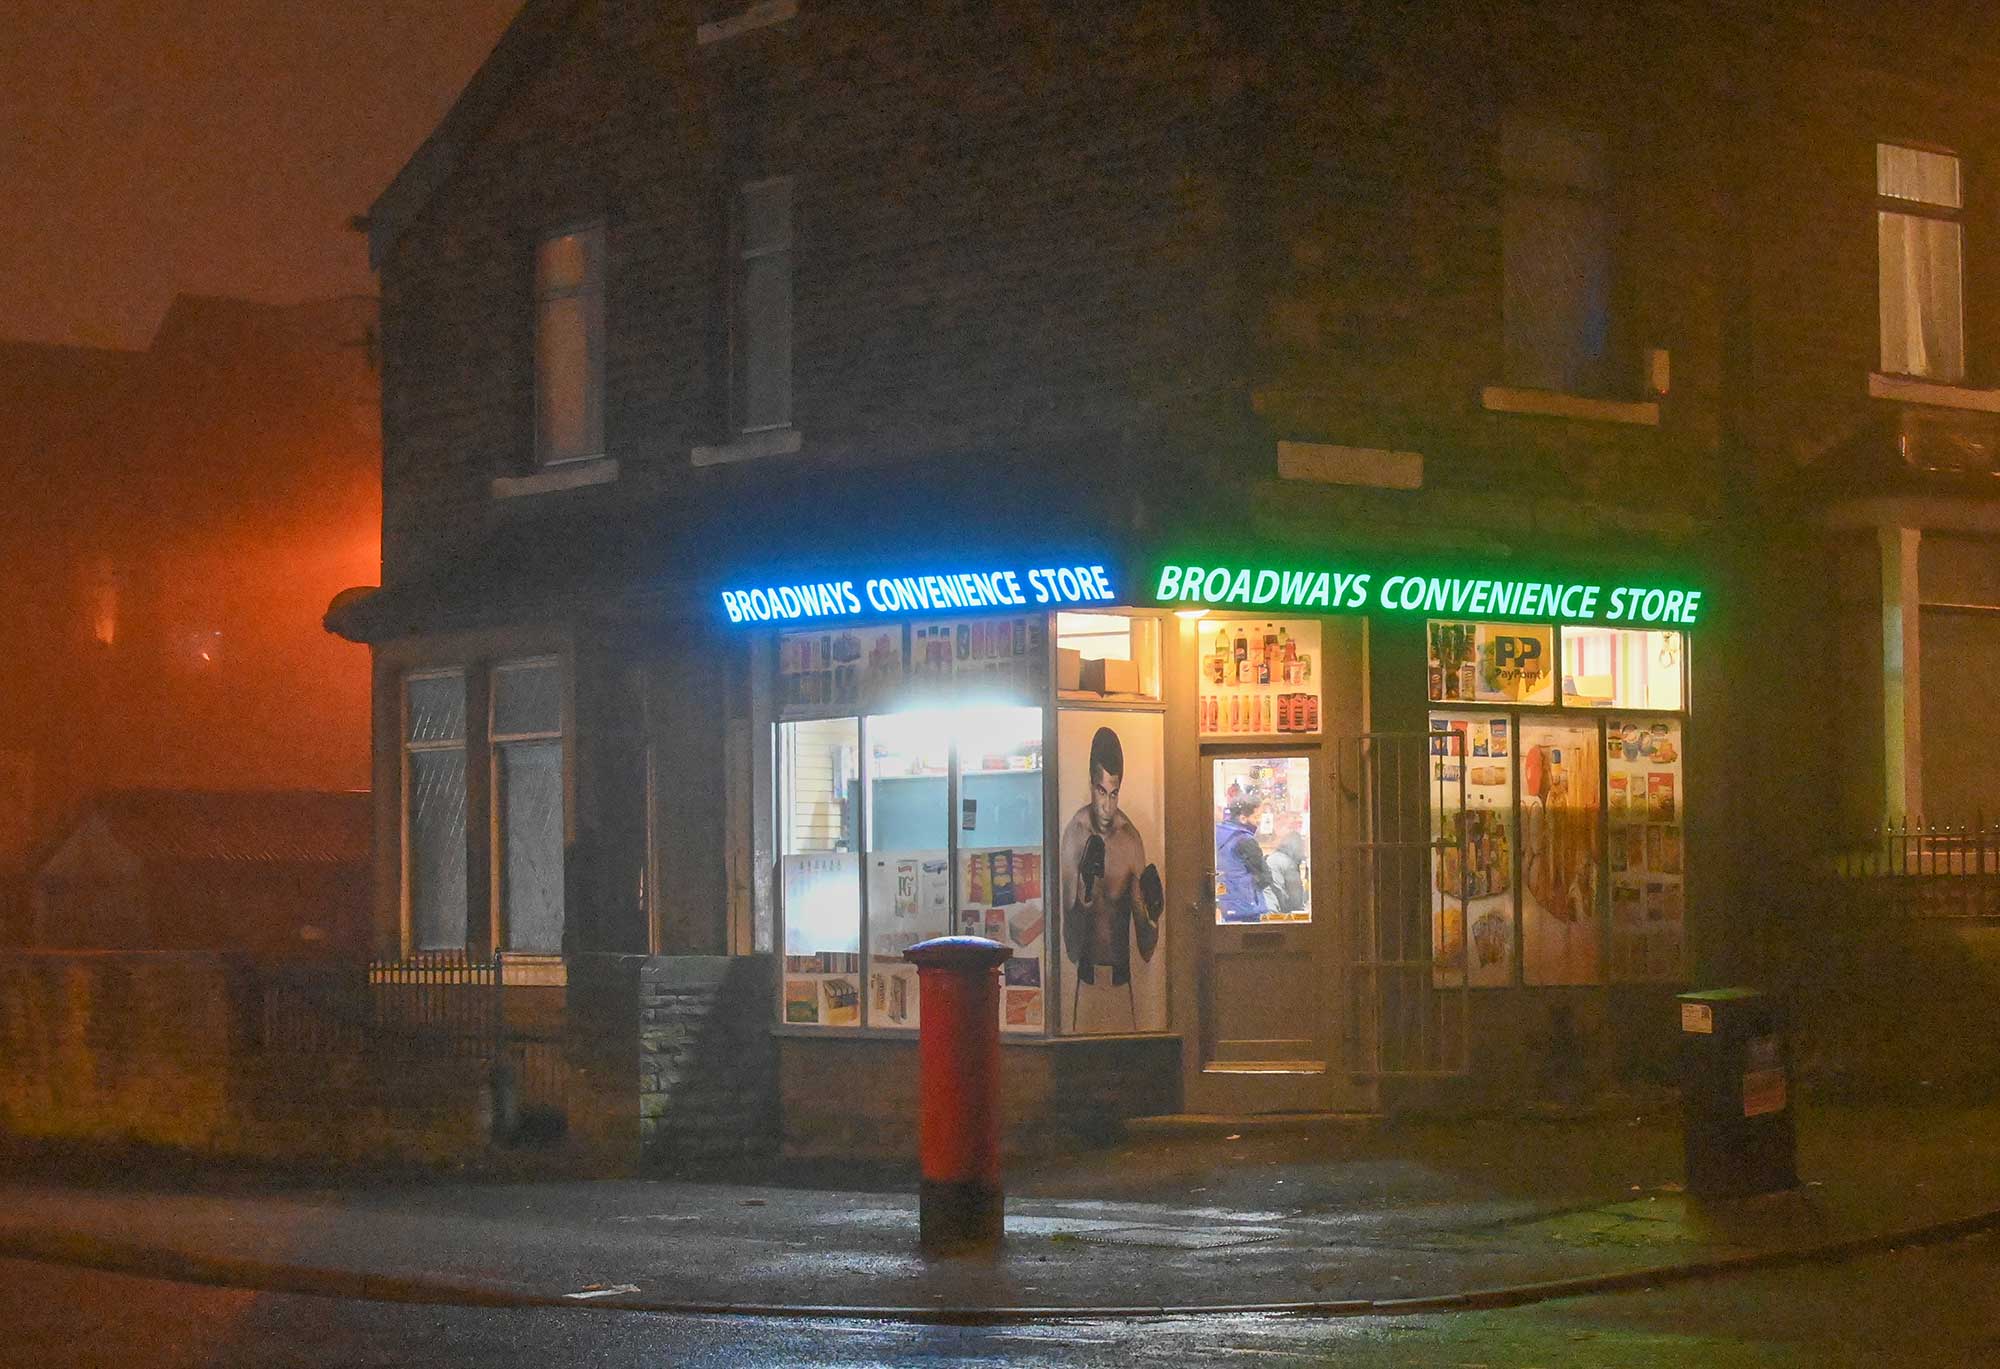 A night time scene showing the illuminated windows of the Broadways Convenience Store.